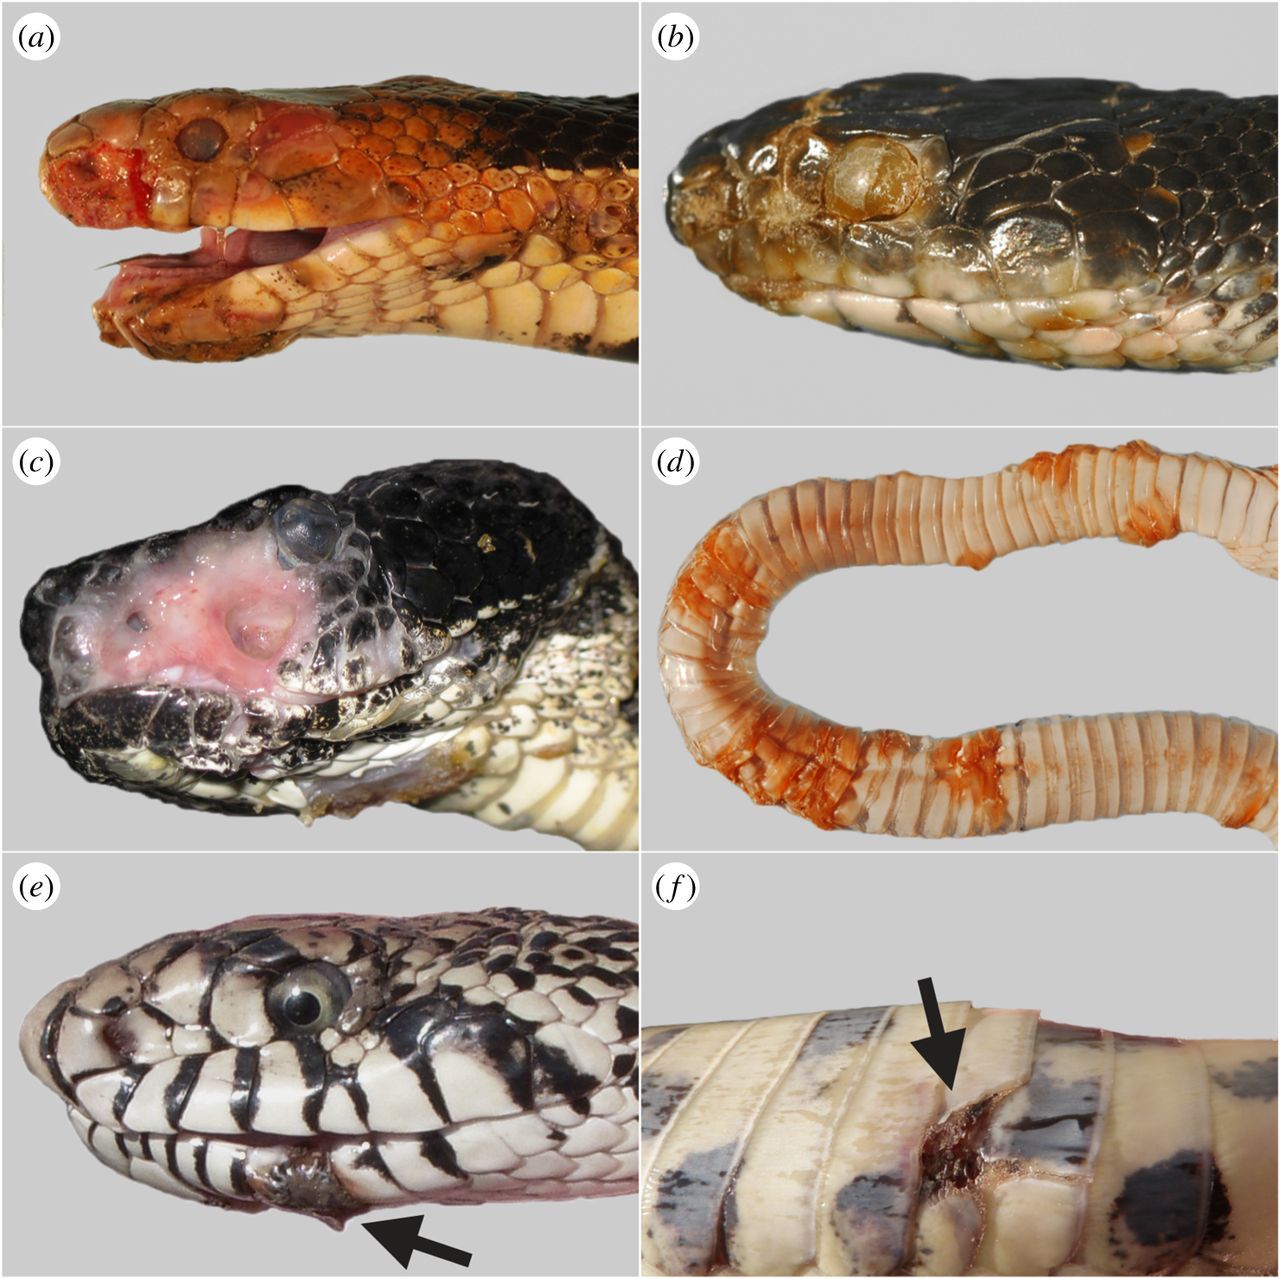 Causes Of Illness In Snakes